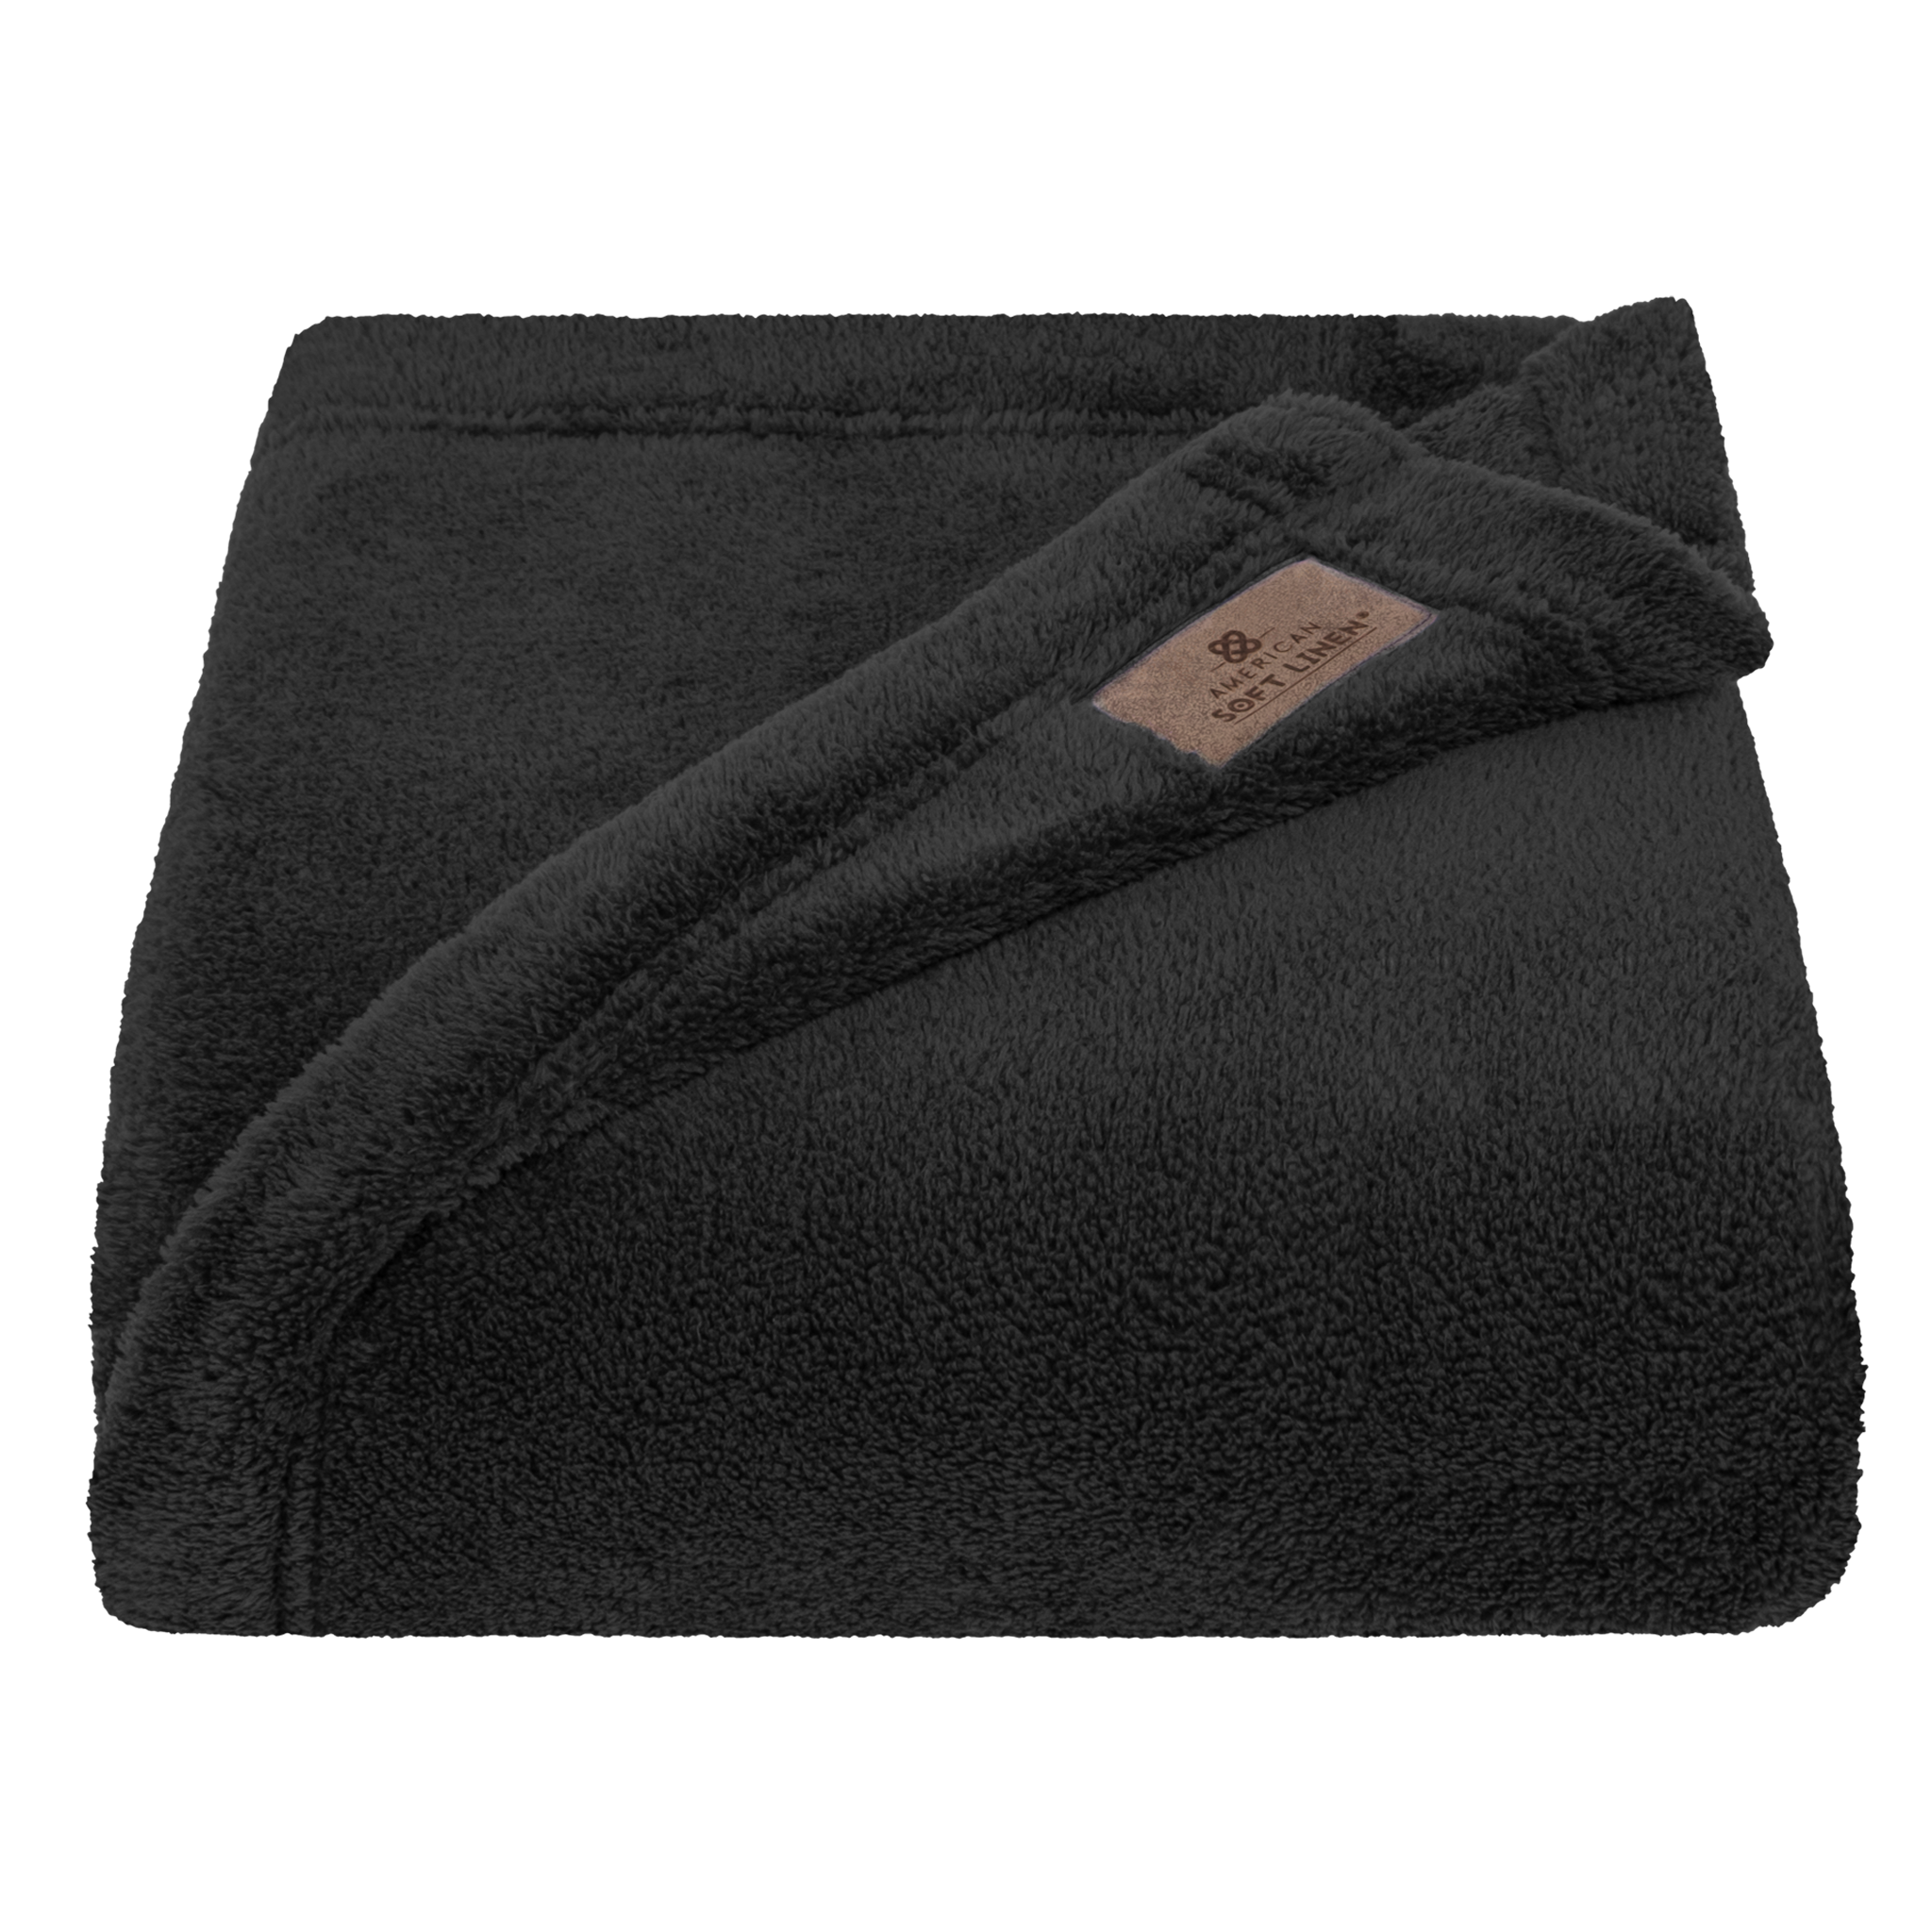 American Soft Linen - Bedding Fleece Blanket - Wholesale - 24 Set Case Pack - Throw Size 50x60 inches - Black - 3